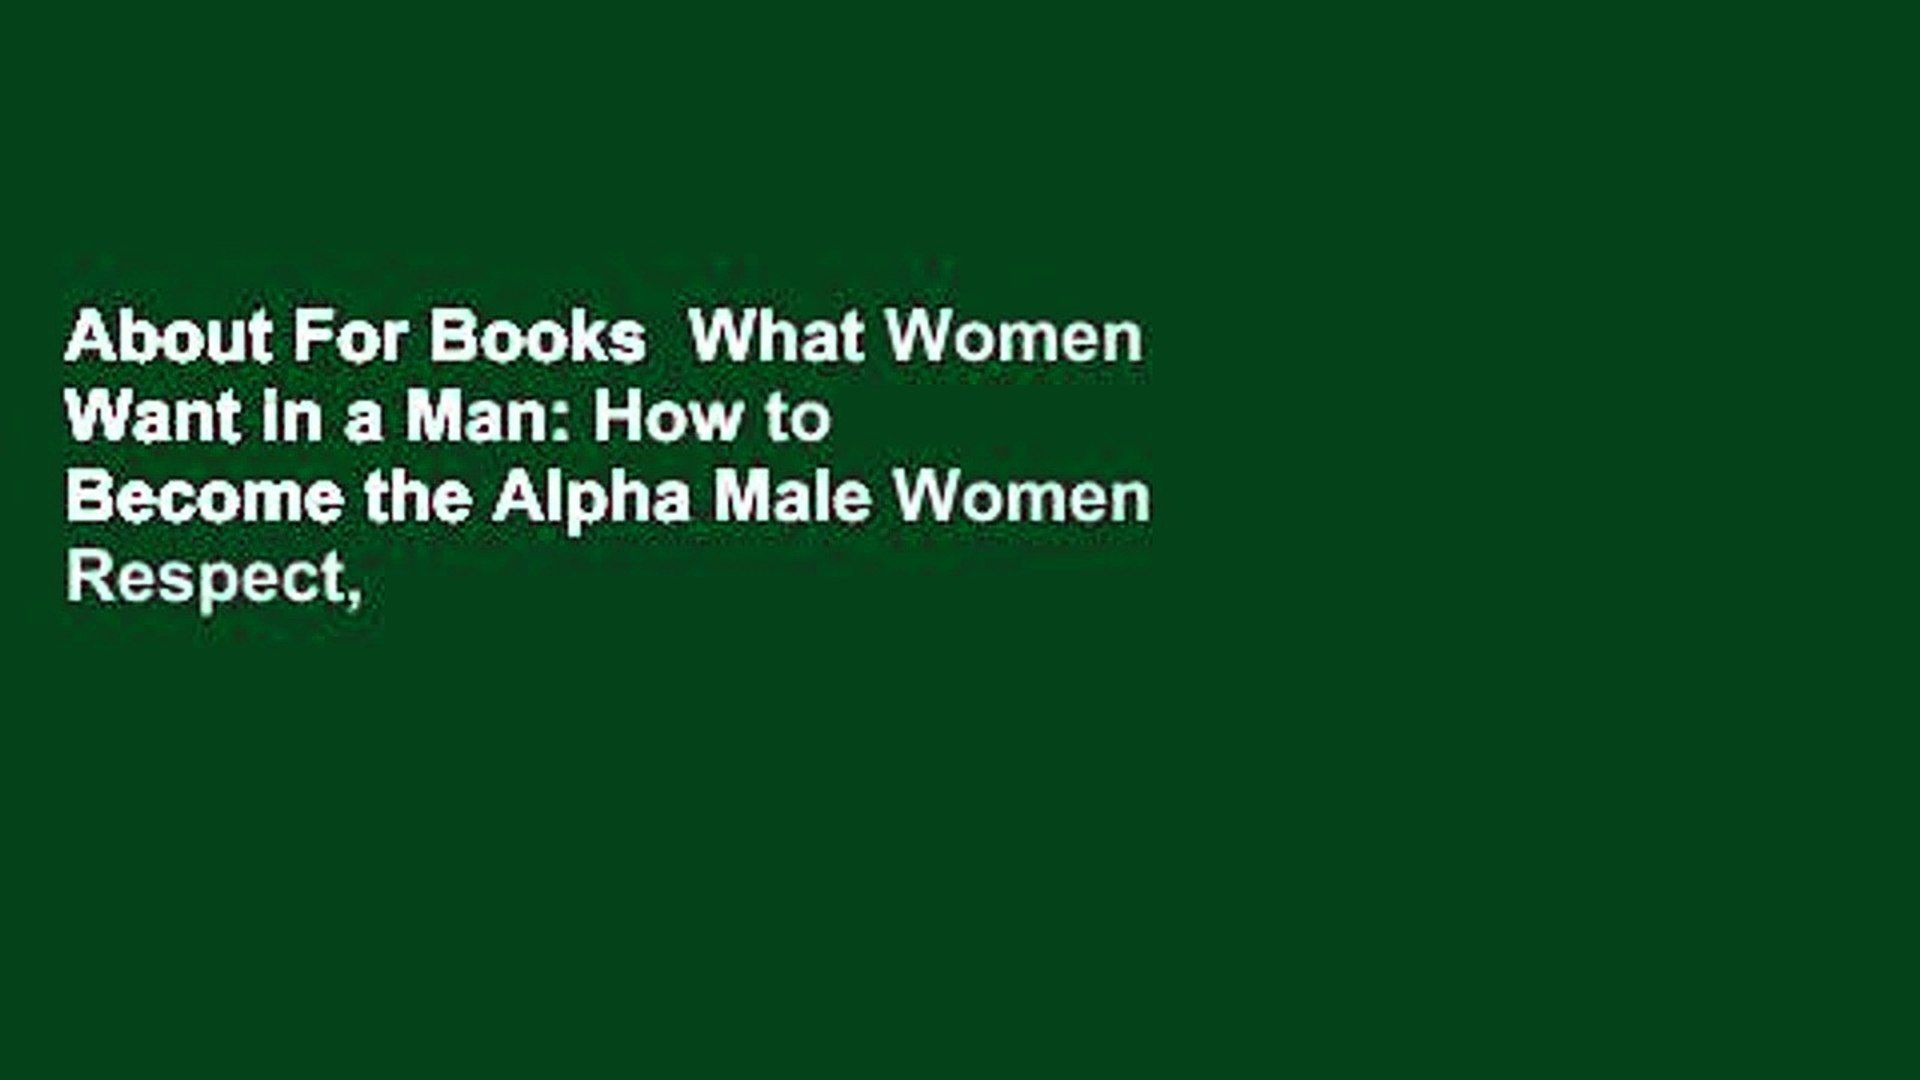 About For Books What Women Want in a Man: How to Become the Alpha